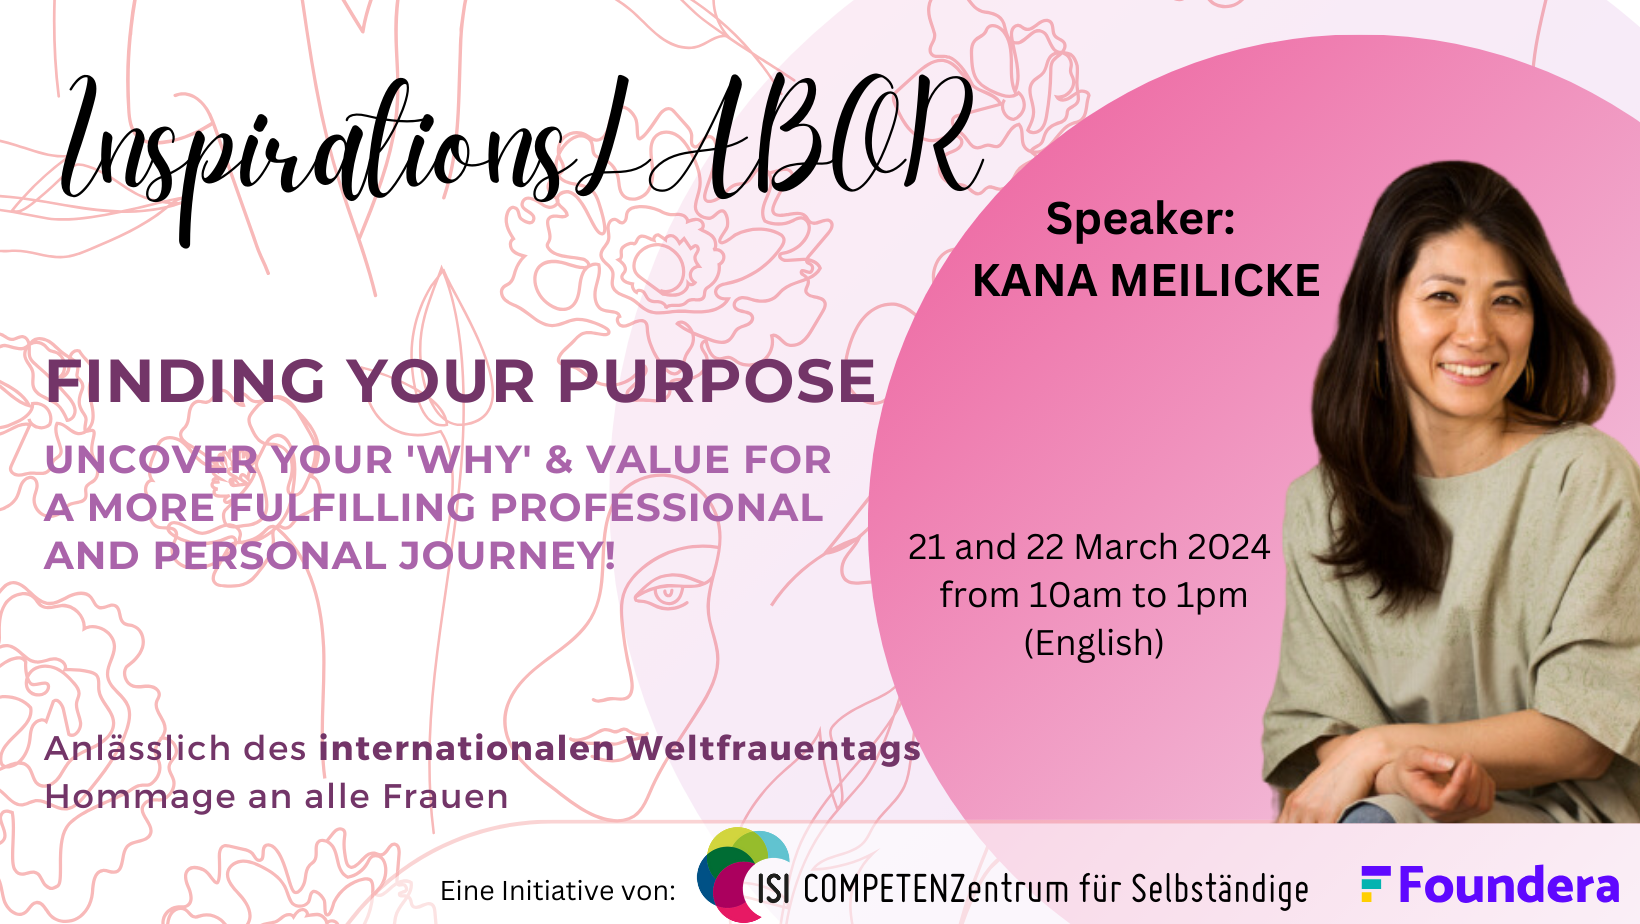 InspirationsLABOR Finding Your Purpose: Uncover Your ‘Why’ & Value for a More Fulfilling Professional and Personal Journey! | at ISI